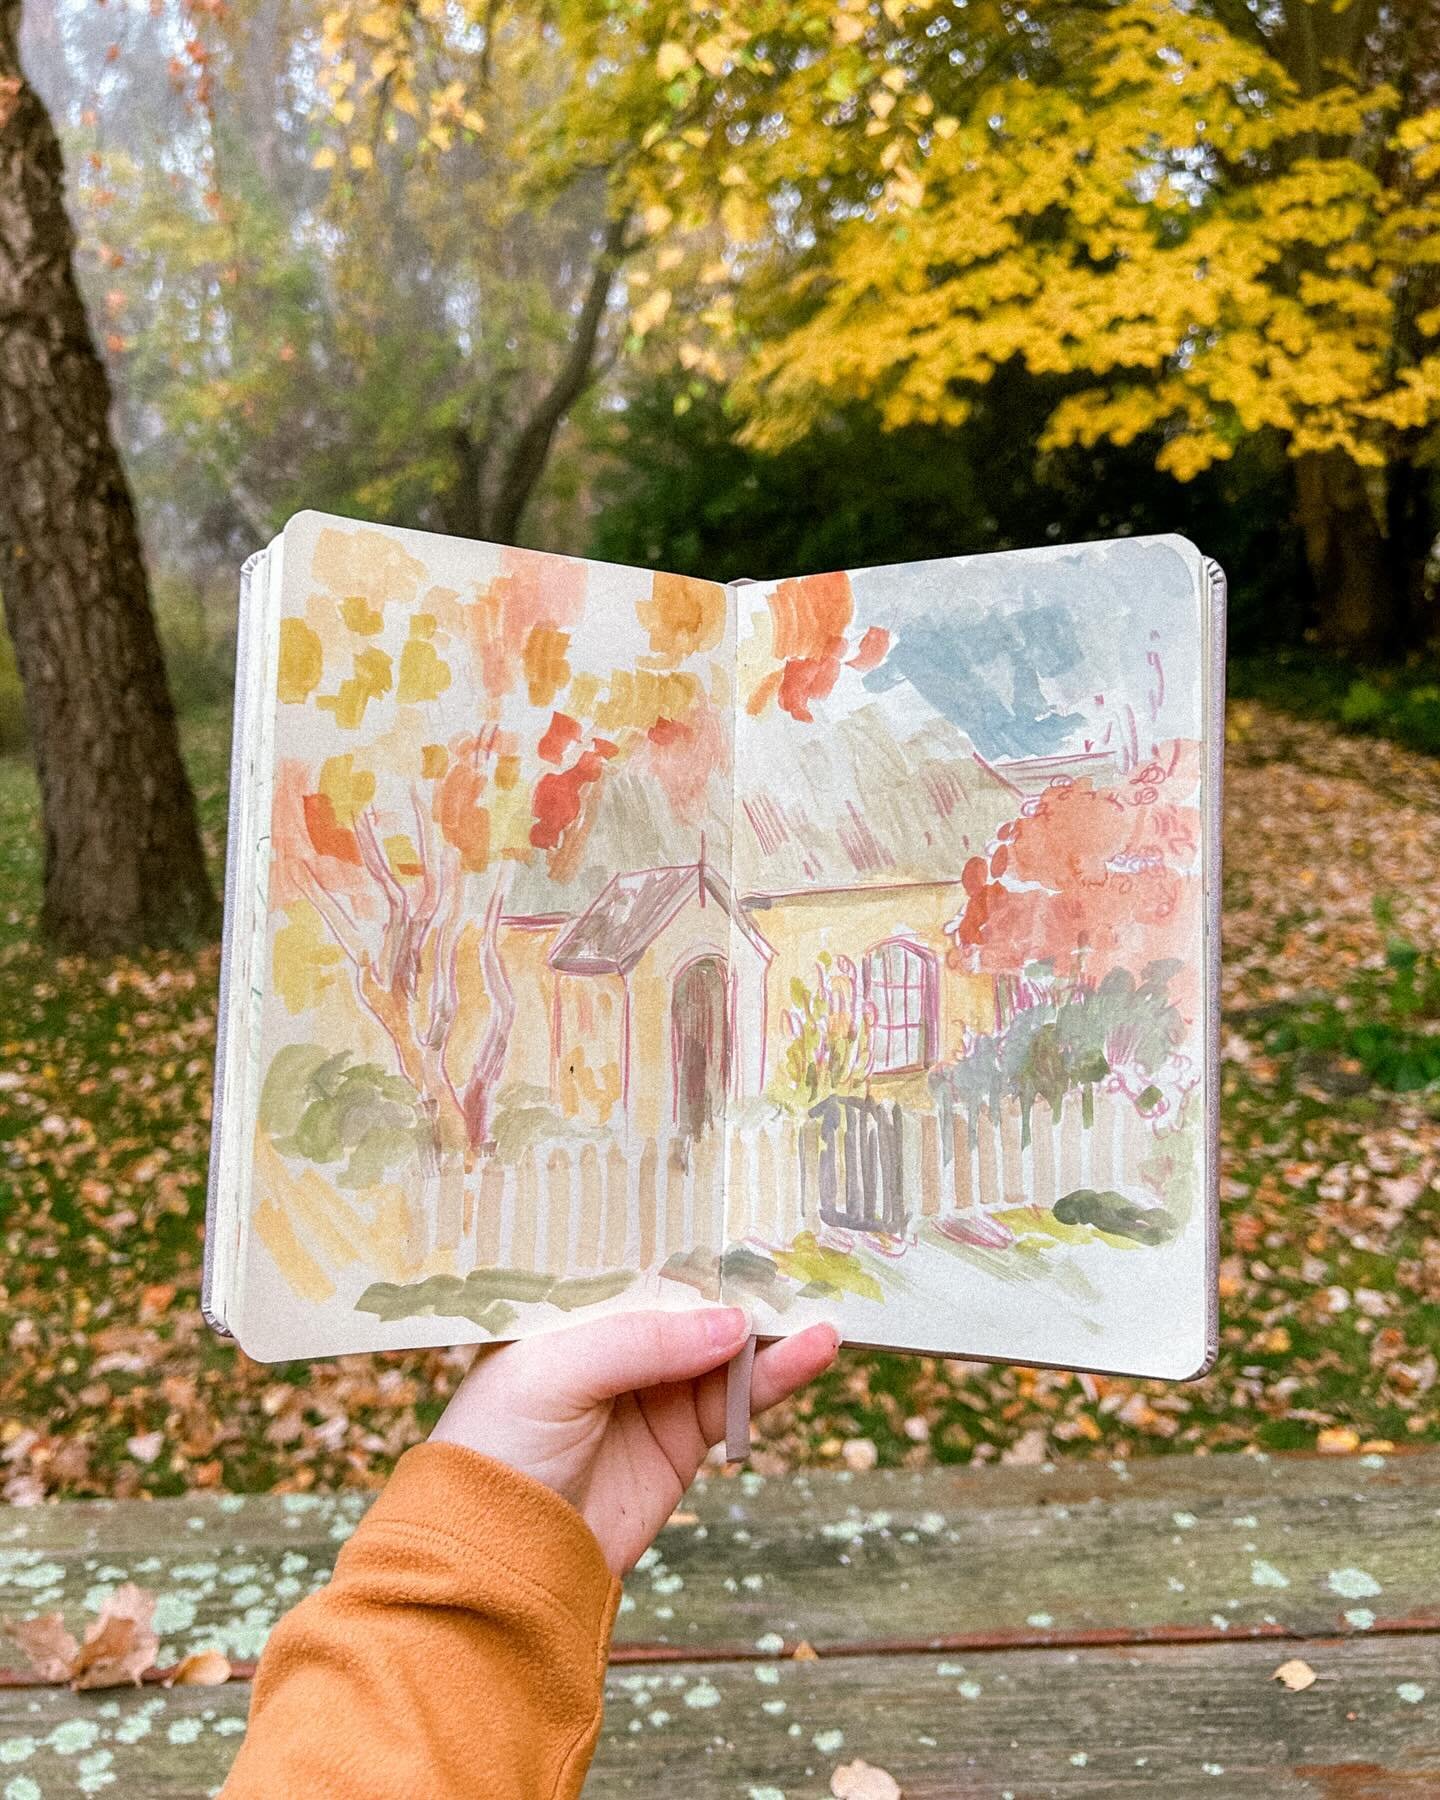 Some of the sketches from last weekend 🍂 The autumn weather was clear and sunny, and the mornings were misty and crisp. This travel/outdoor sketchbook has been neglected all year, so it was nice to finally fill some more pages. 
.
.
.
#sketchbookdra